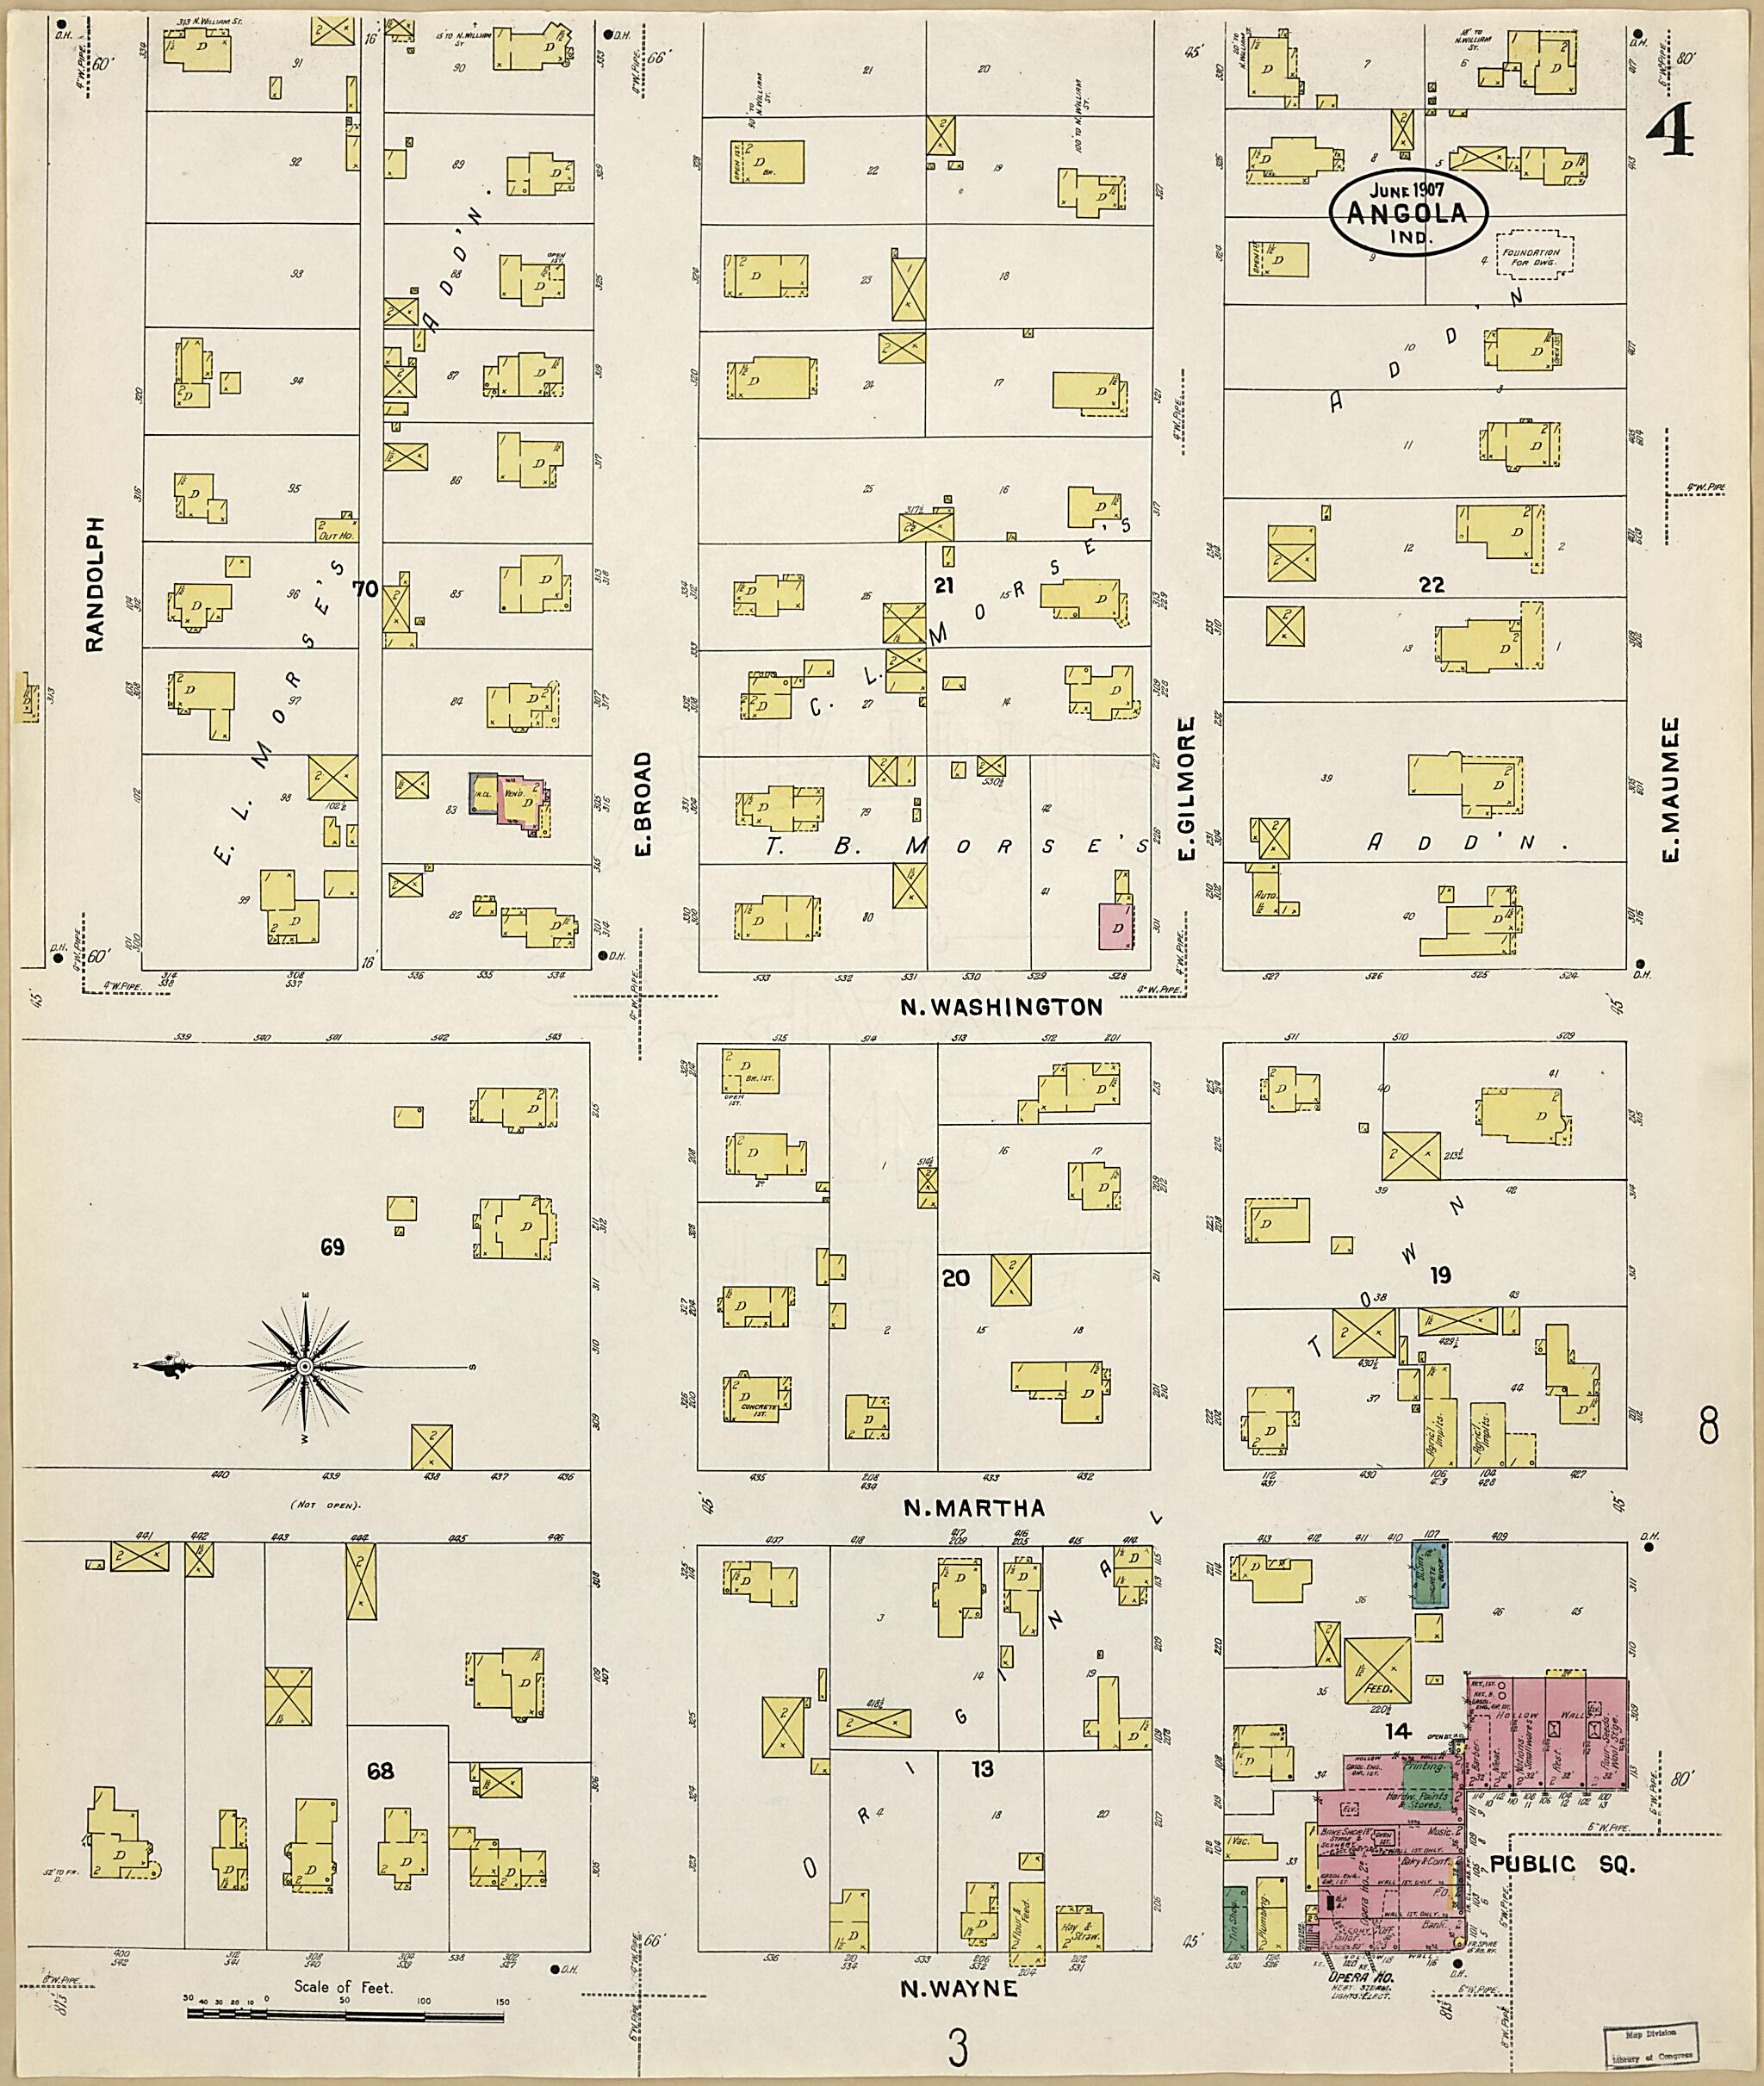 This old map of Angola, Steuben County, Indiana was created by Sanborn Map Company in 1907